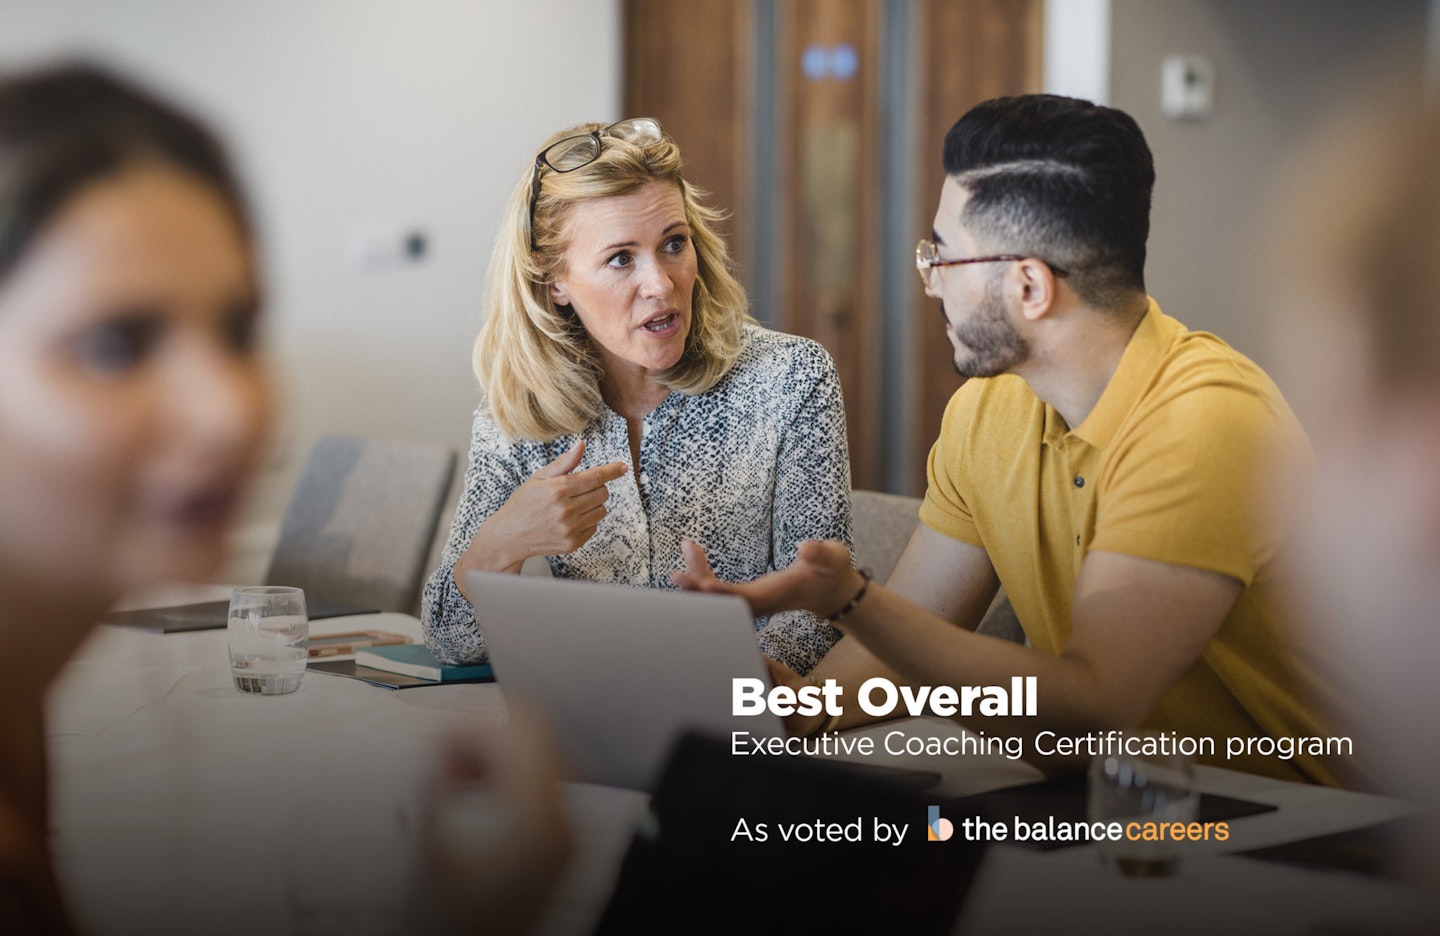 Best overall executive coaching certification program